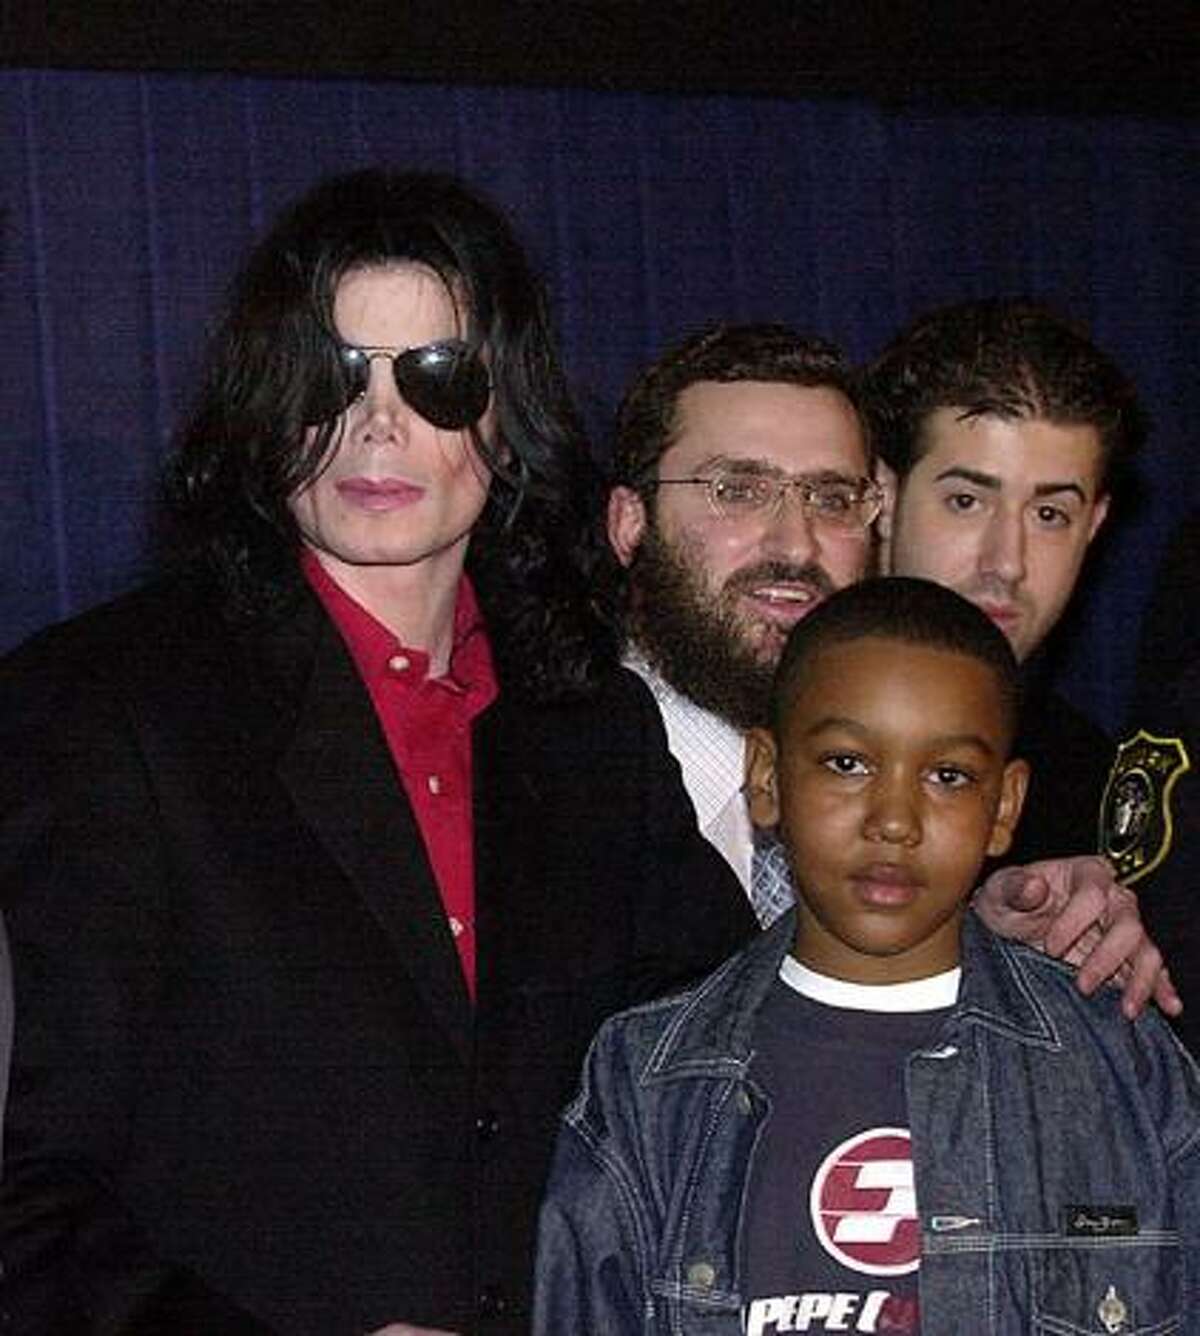 FILE - In this March 25, 2001 file photograph, pop icon Michael Jackson, center, and Rabbi Schmuley Boteach, pose with a child and an unidentified man at the Loew's Metroplex theatre in Newark, N.J., at the kickoff of Jackson's" Heal The Kids" program designed to promote quality time between parents and children. A new book, "The Michael Jackson Tapes," by Boteach, Michael Jackson's former spiritual adviser says the pop superstar feared the ravages of old age and appeared to be abusing prescription drugs and cosmetic surgery nearly a decade before his death. (AP Photo/Warren Westura, File)